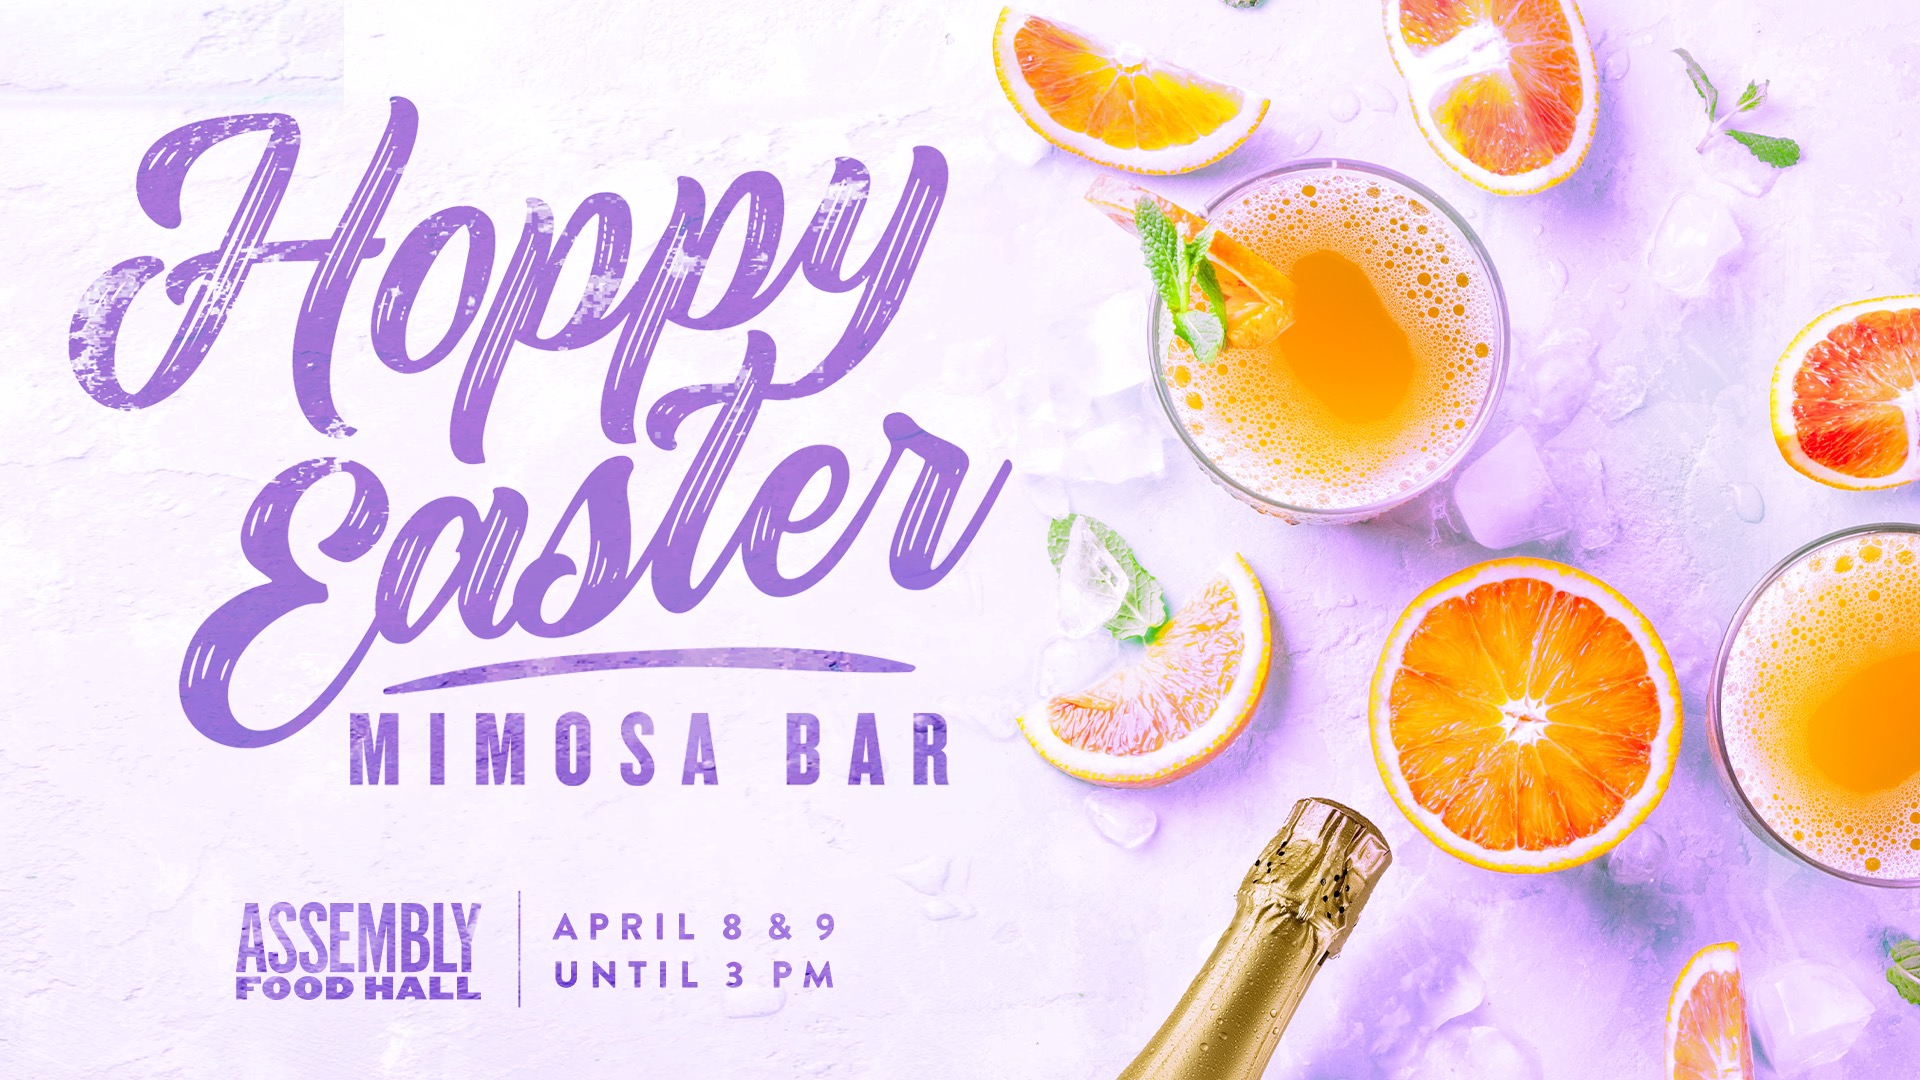 Promo image of Easter Weekend Mimosa Bar 